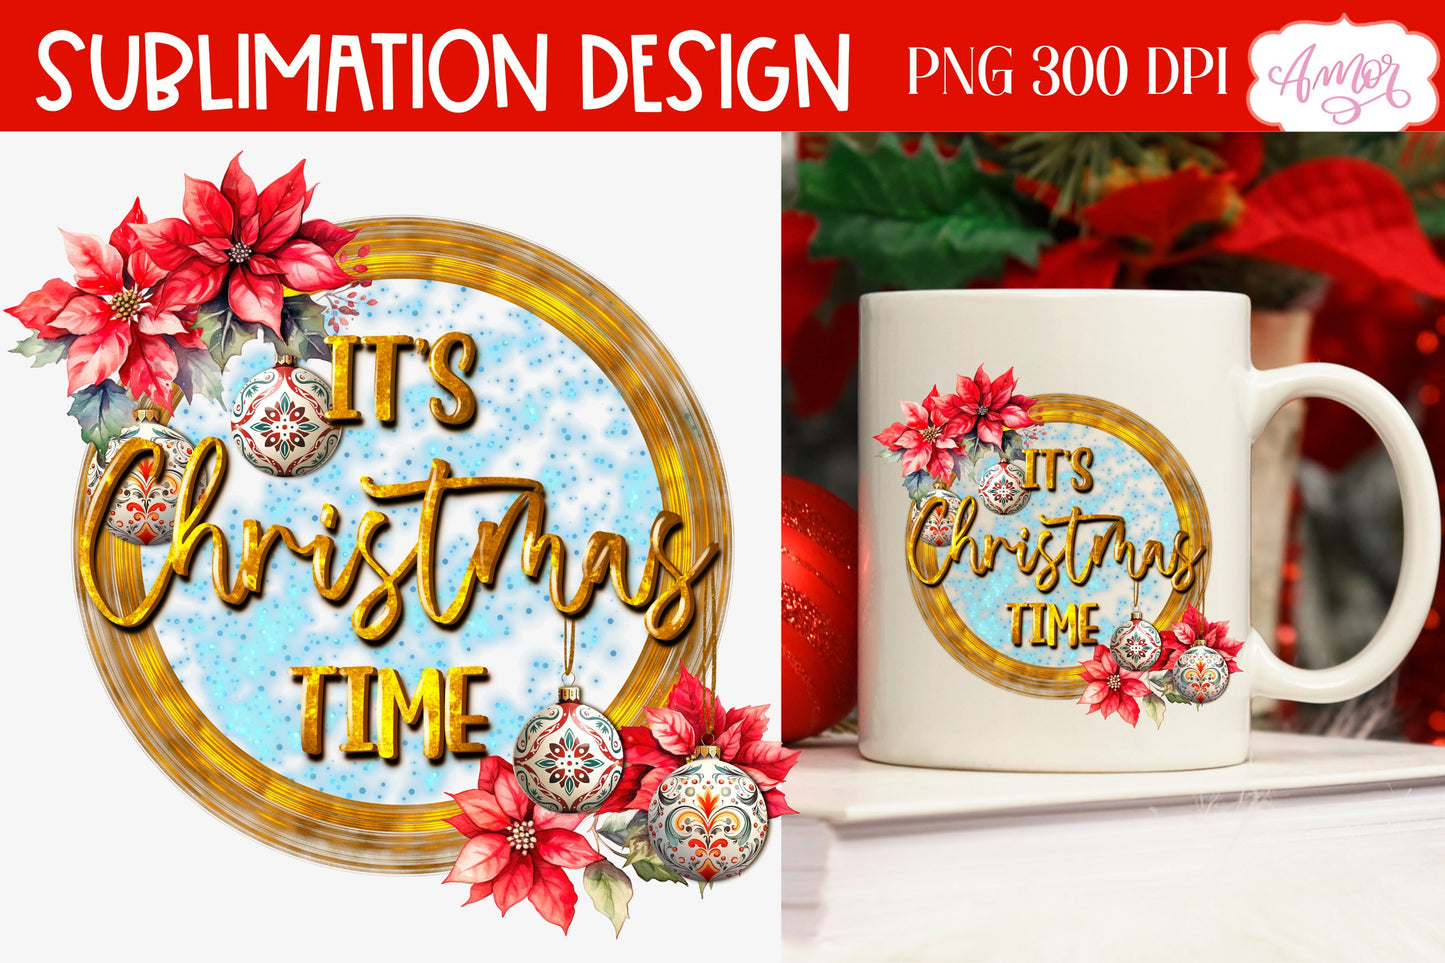 It's Christmas time PNG design for sublimation